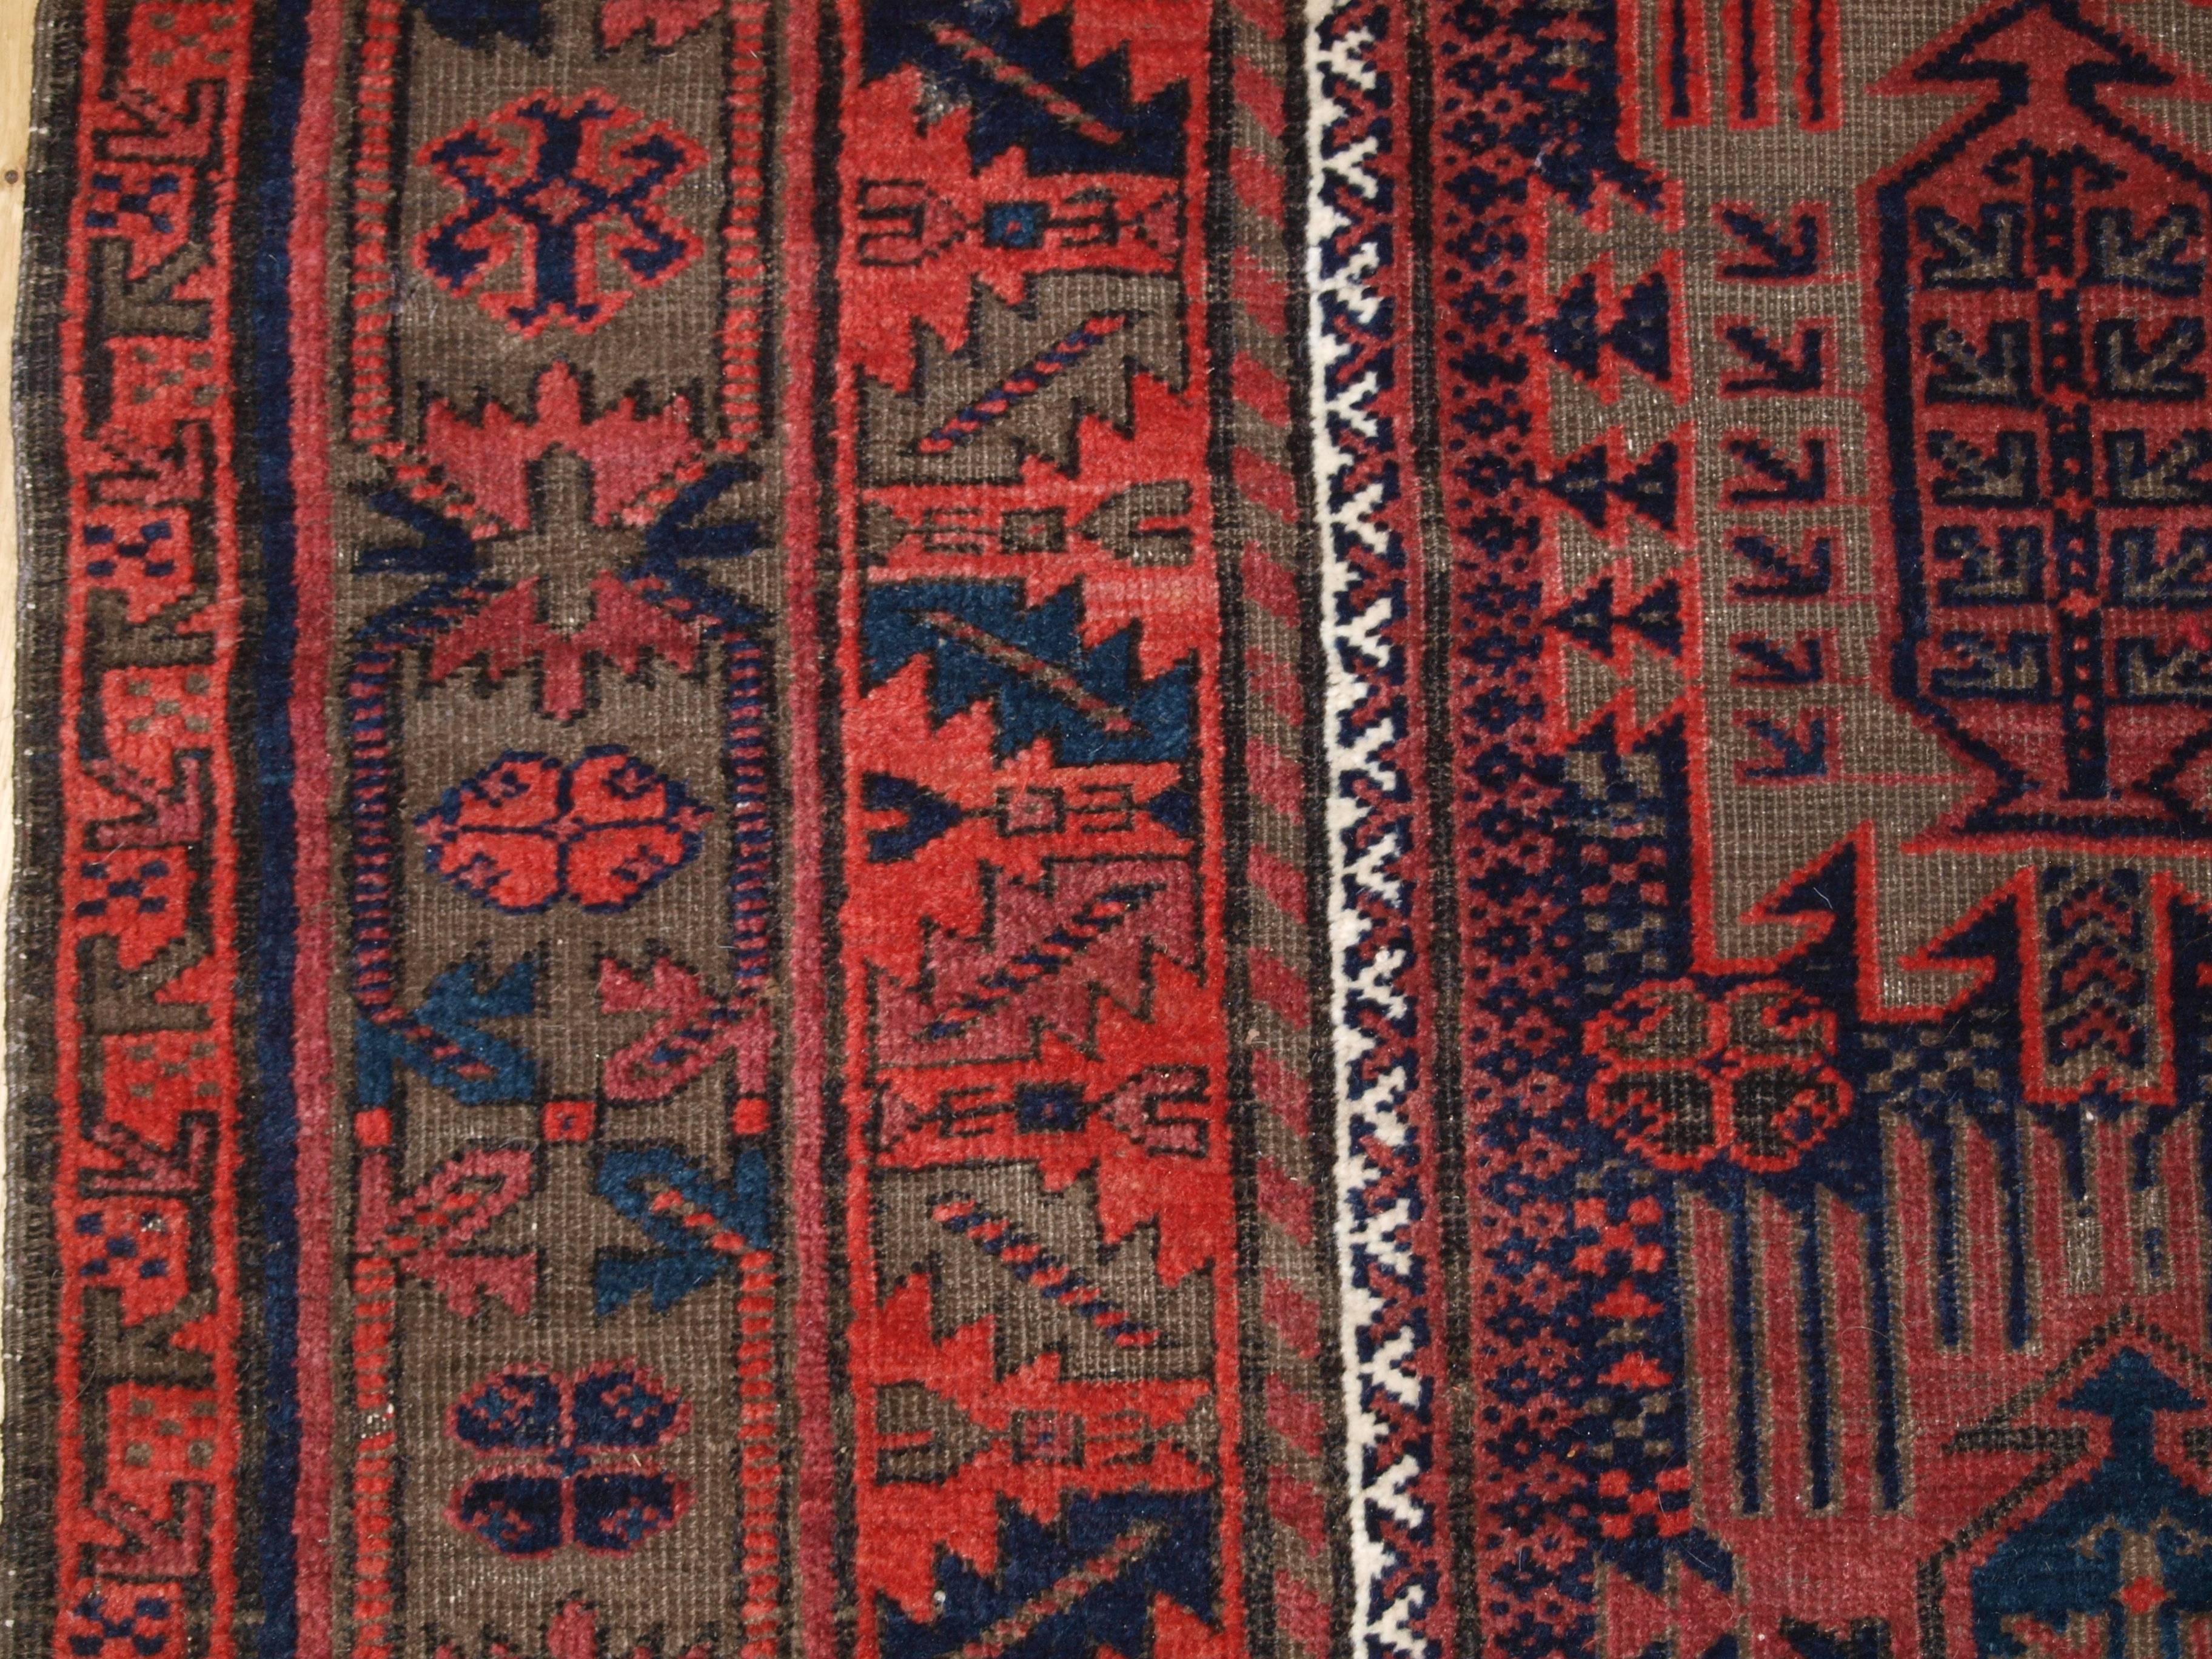 Antique Timuri Baluch Main Carpet with Classic Afghan Timuri Design, circa 1900 In Good Condition For Sale In Moreton-in-Marsh, GB